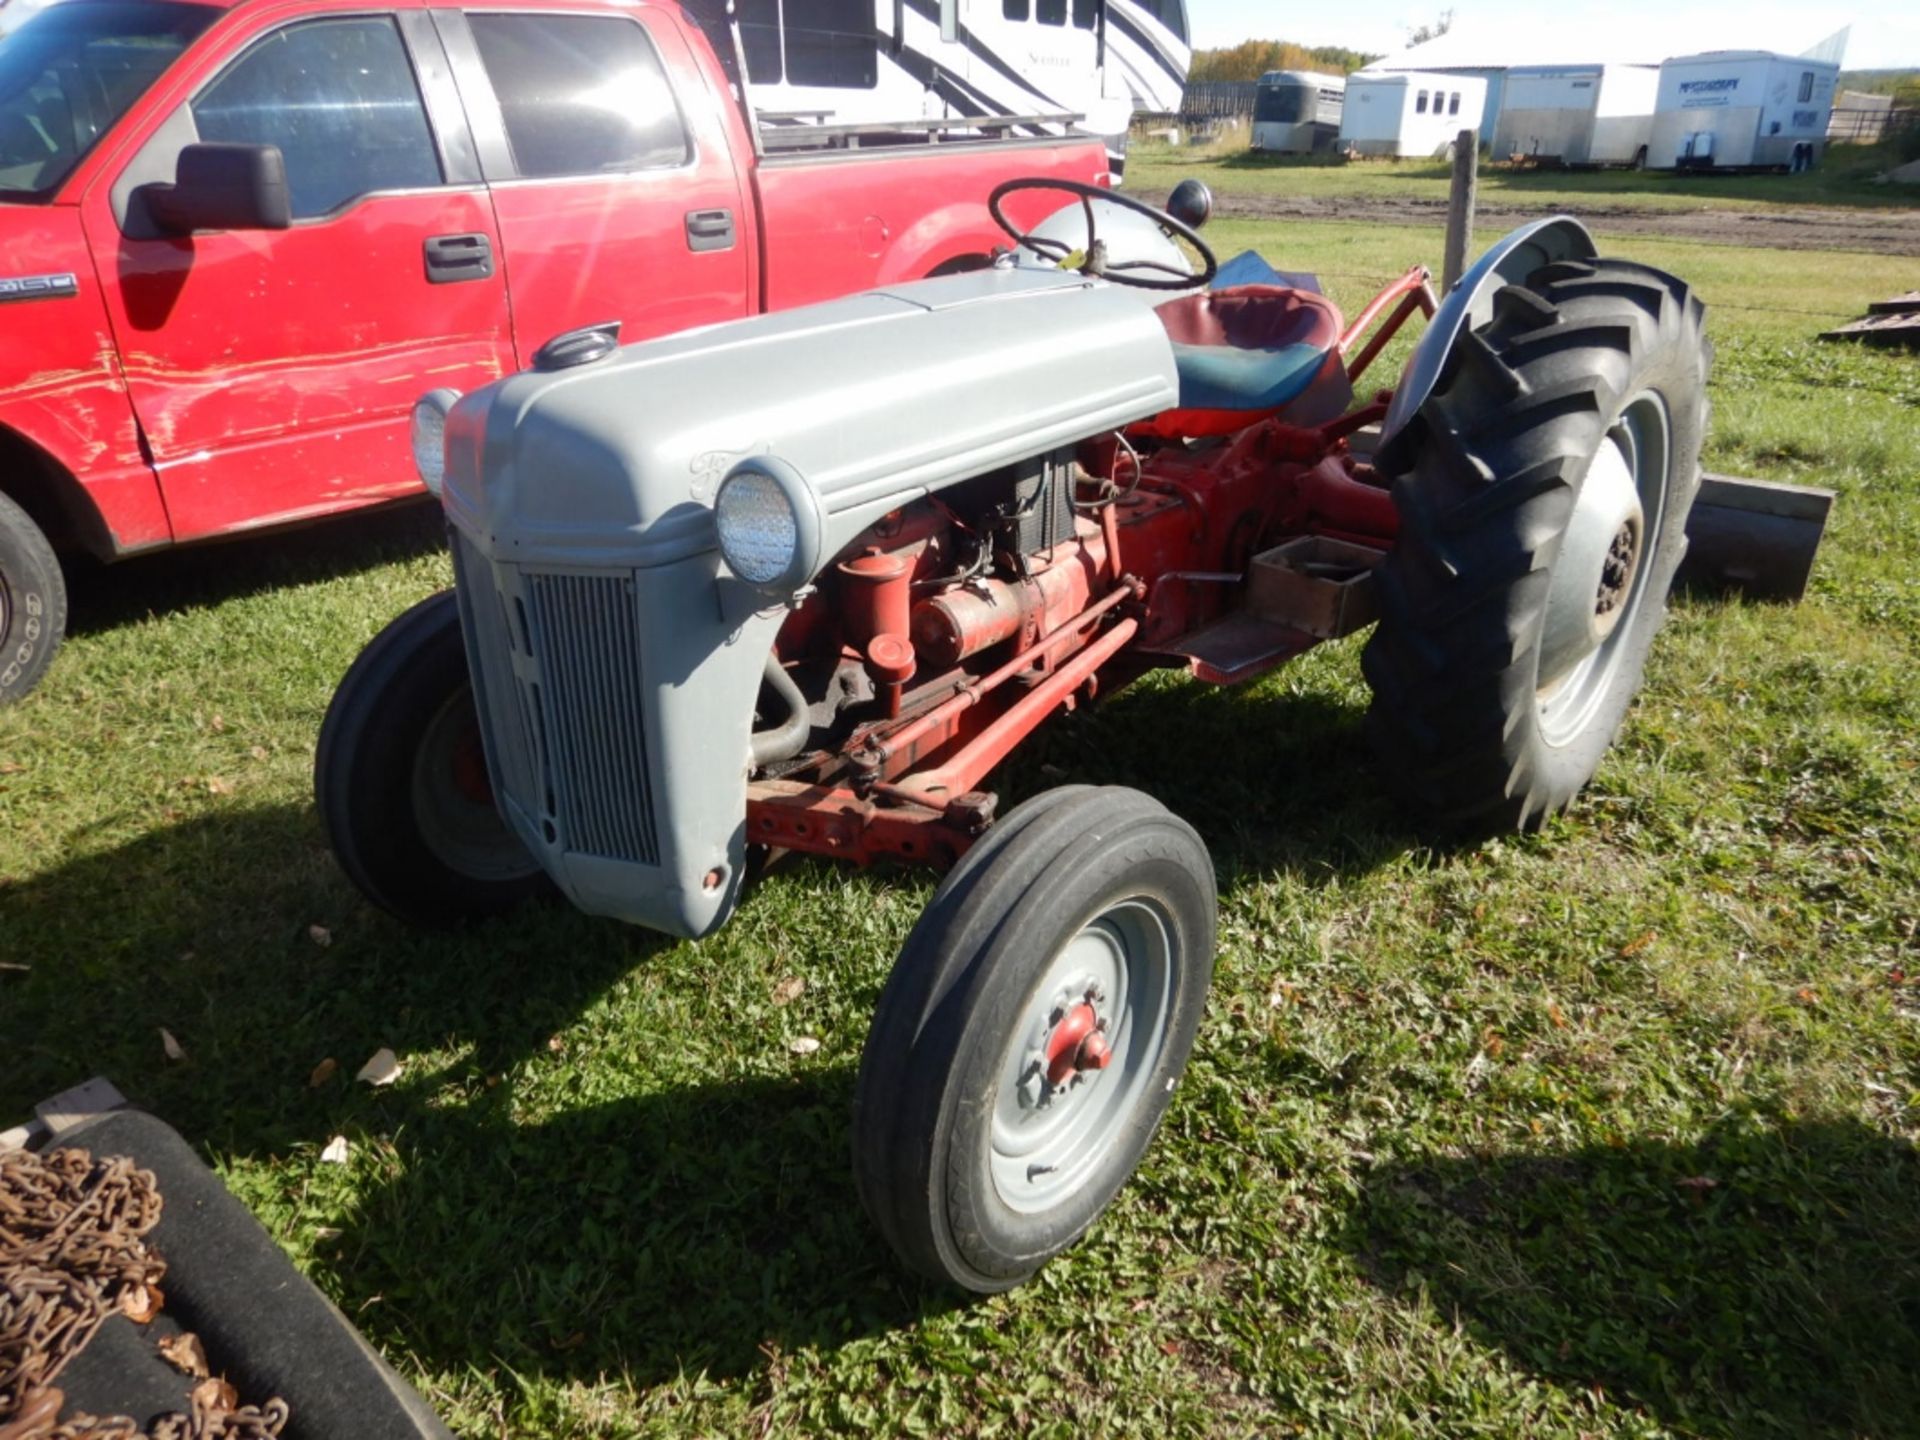 FORDSON 8N TRACTOR W/ 3PT, REAR BLADE, FERGUSON CARRY-ALL TOTE, TIRE CHAINS, CENTRE LINK - RUNS WELL